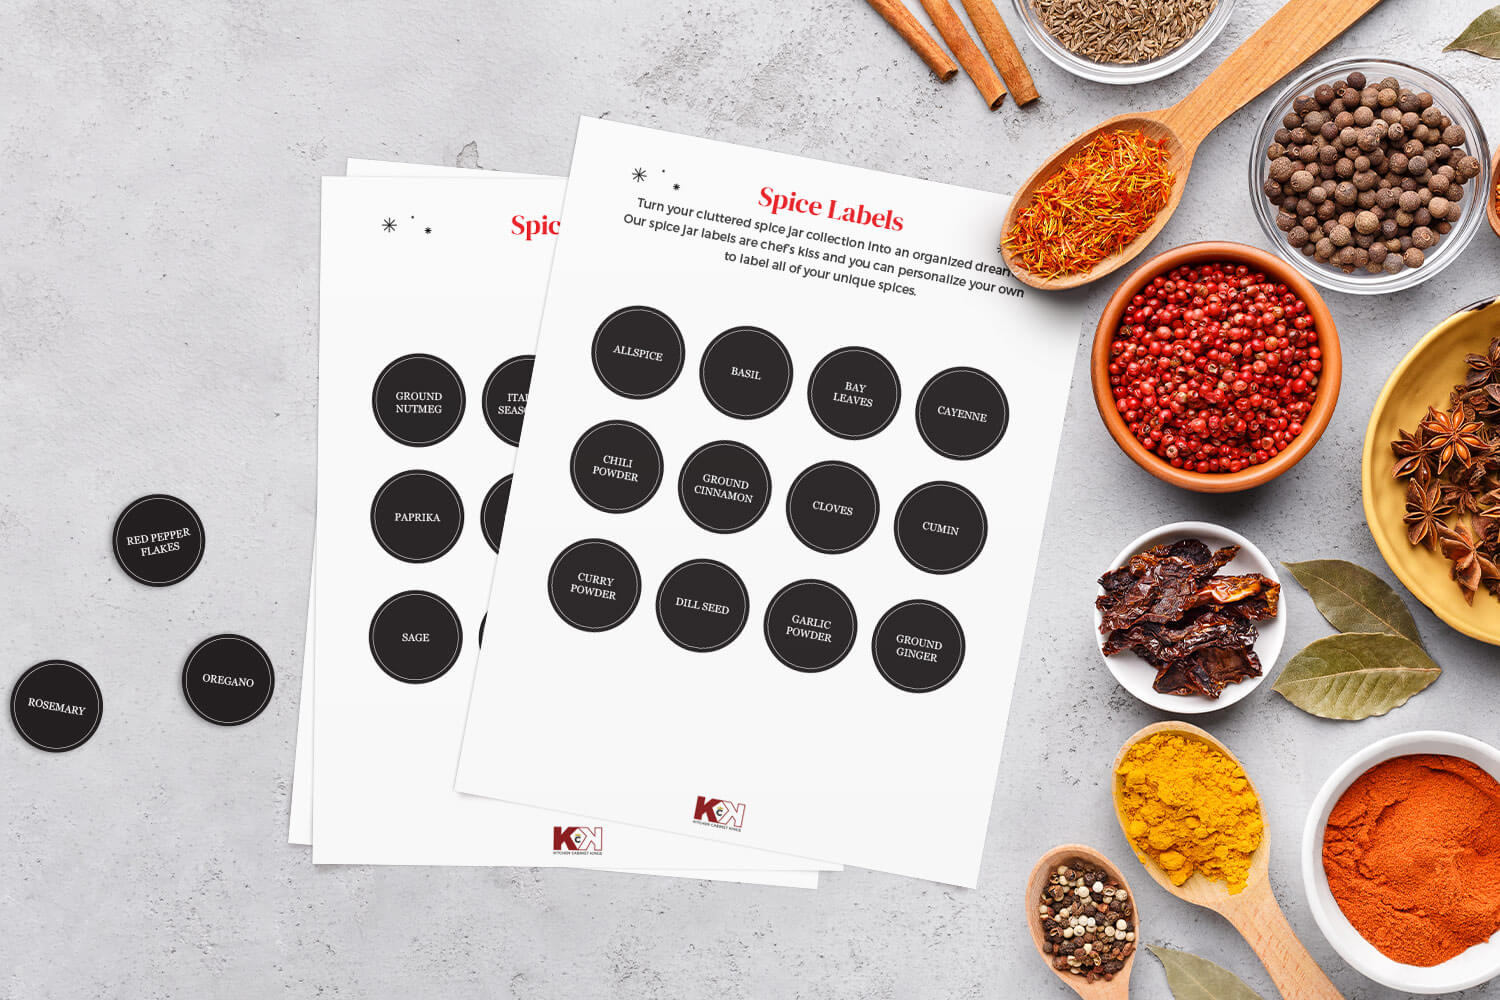 Black and white spice label templates on gray surface with different vibrant spices and herbs.